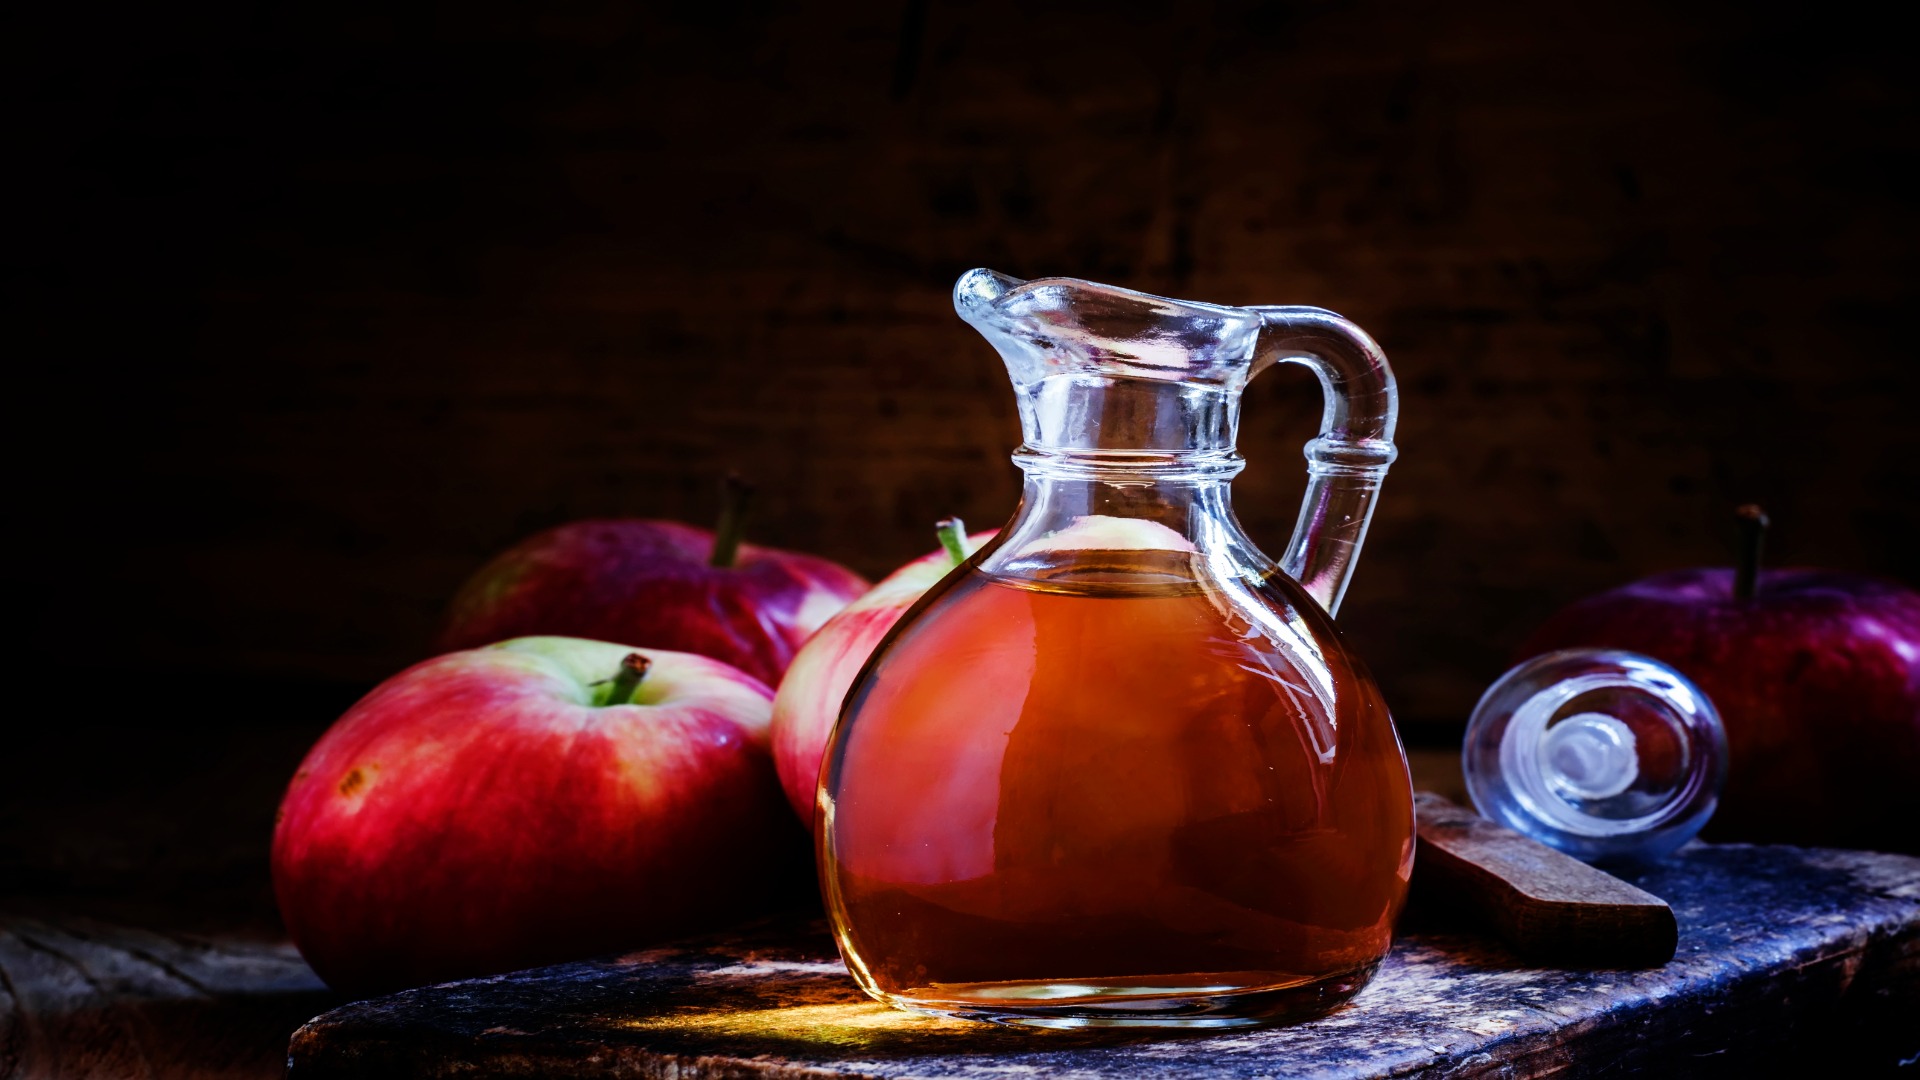 Apple Cider Vinegar: A Health Food That Should be on Every Shelf